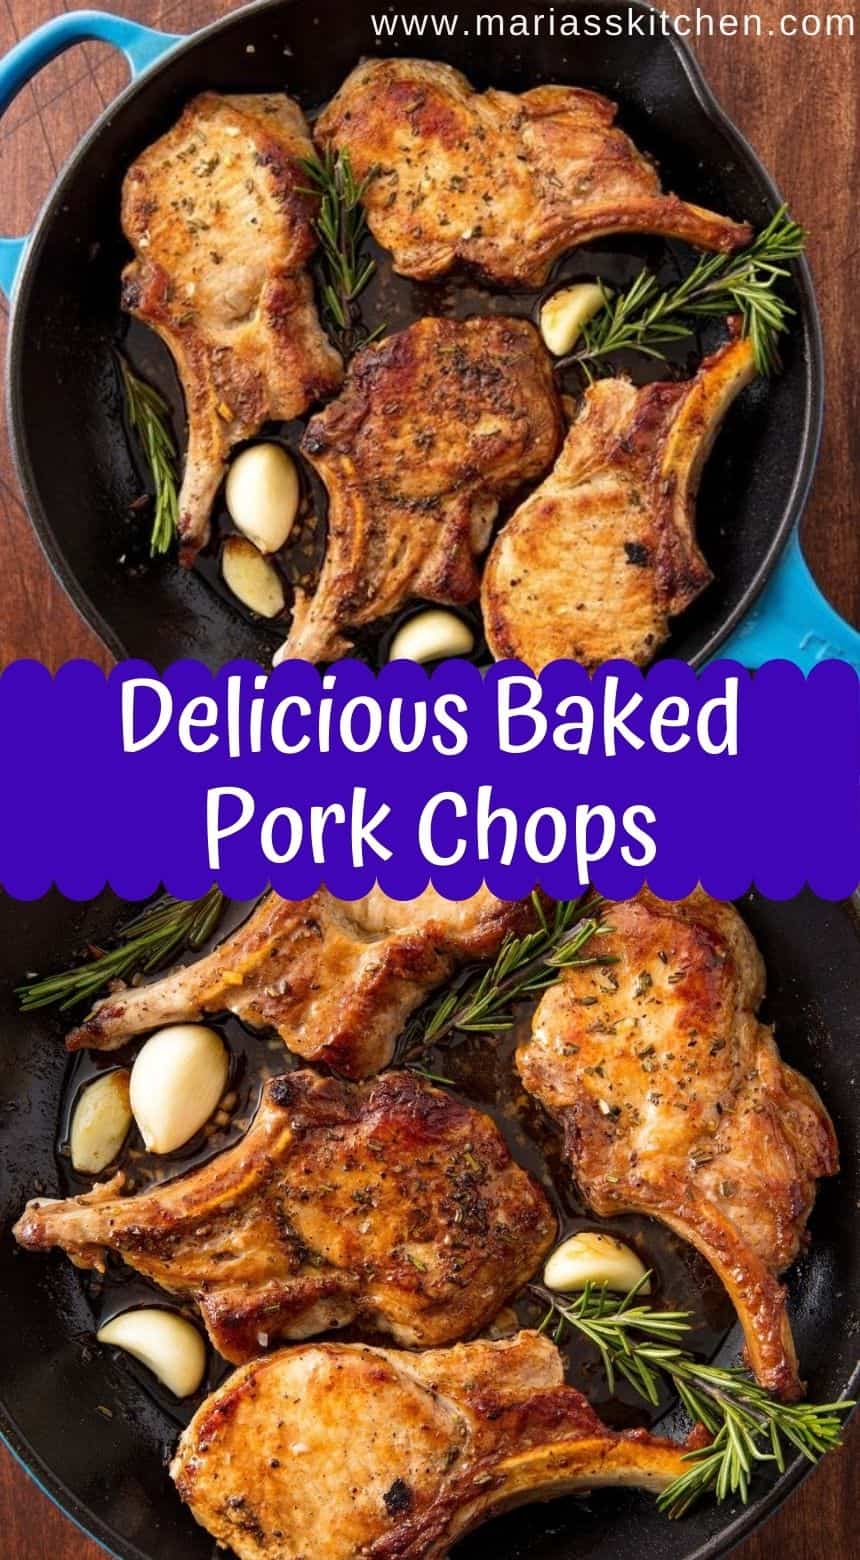 Delicious Baked Pork Chops - Maria's Kitchen